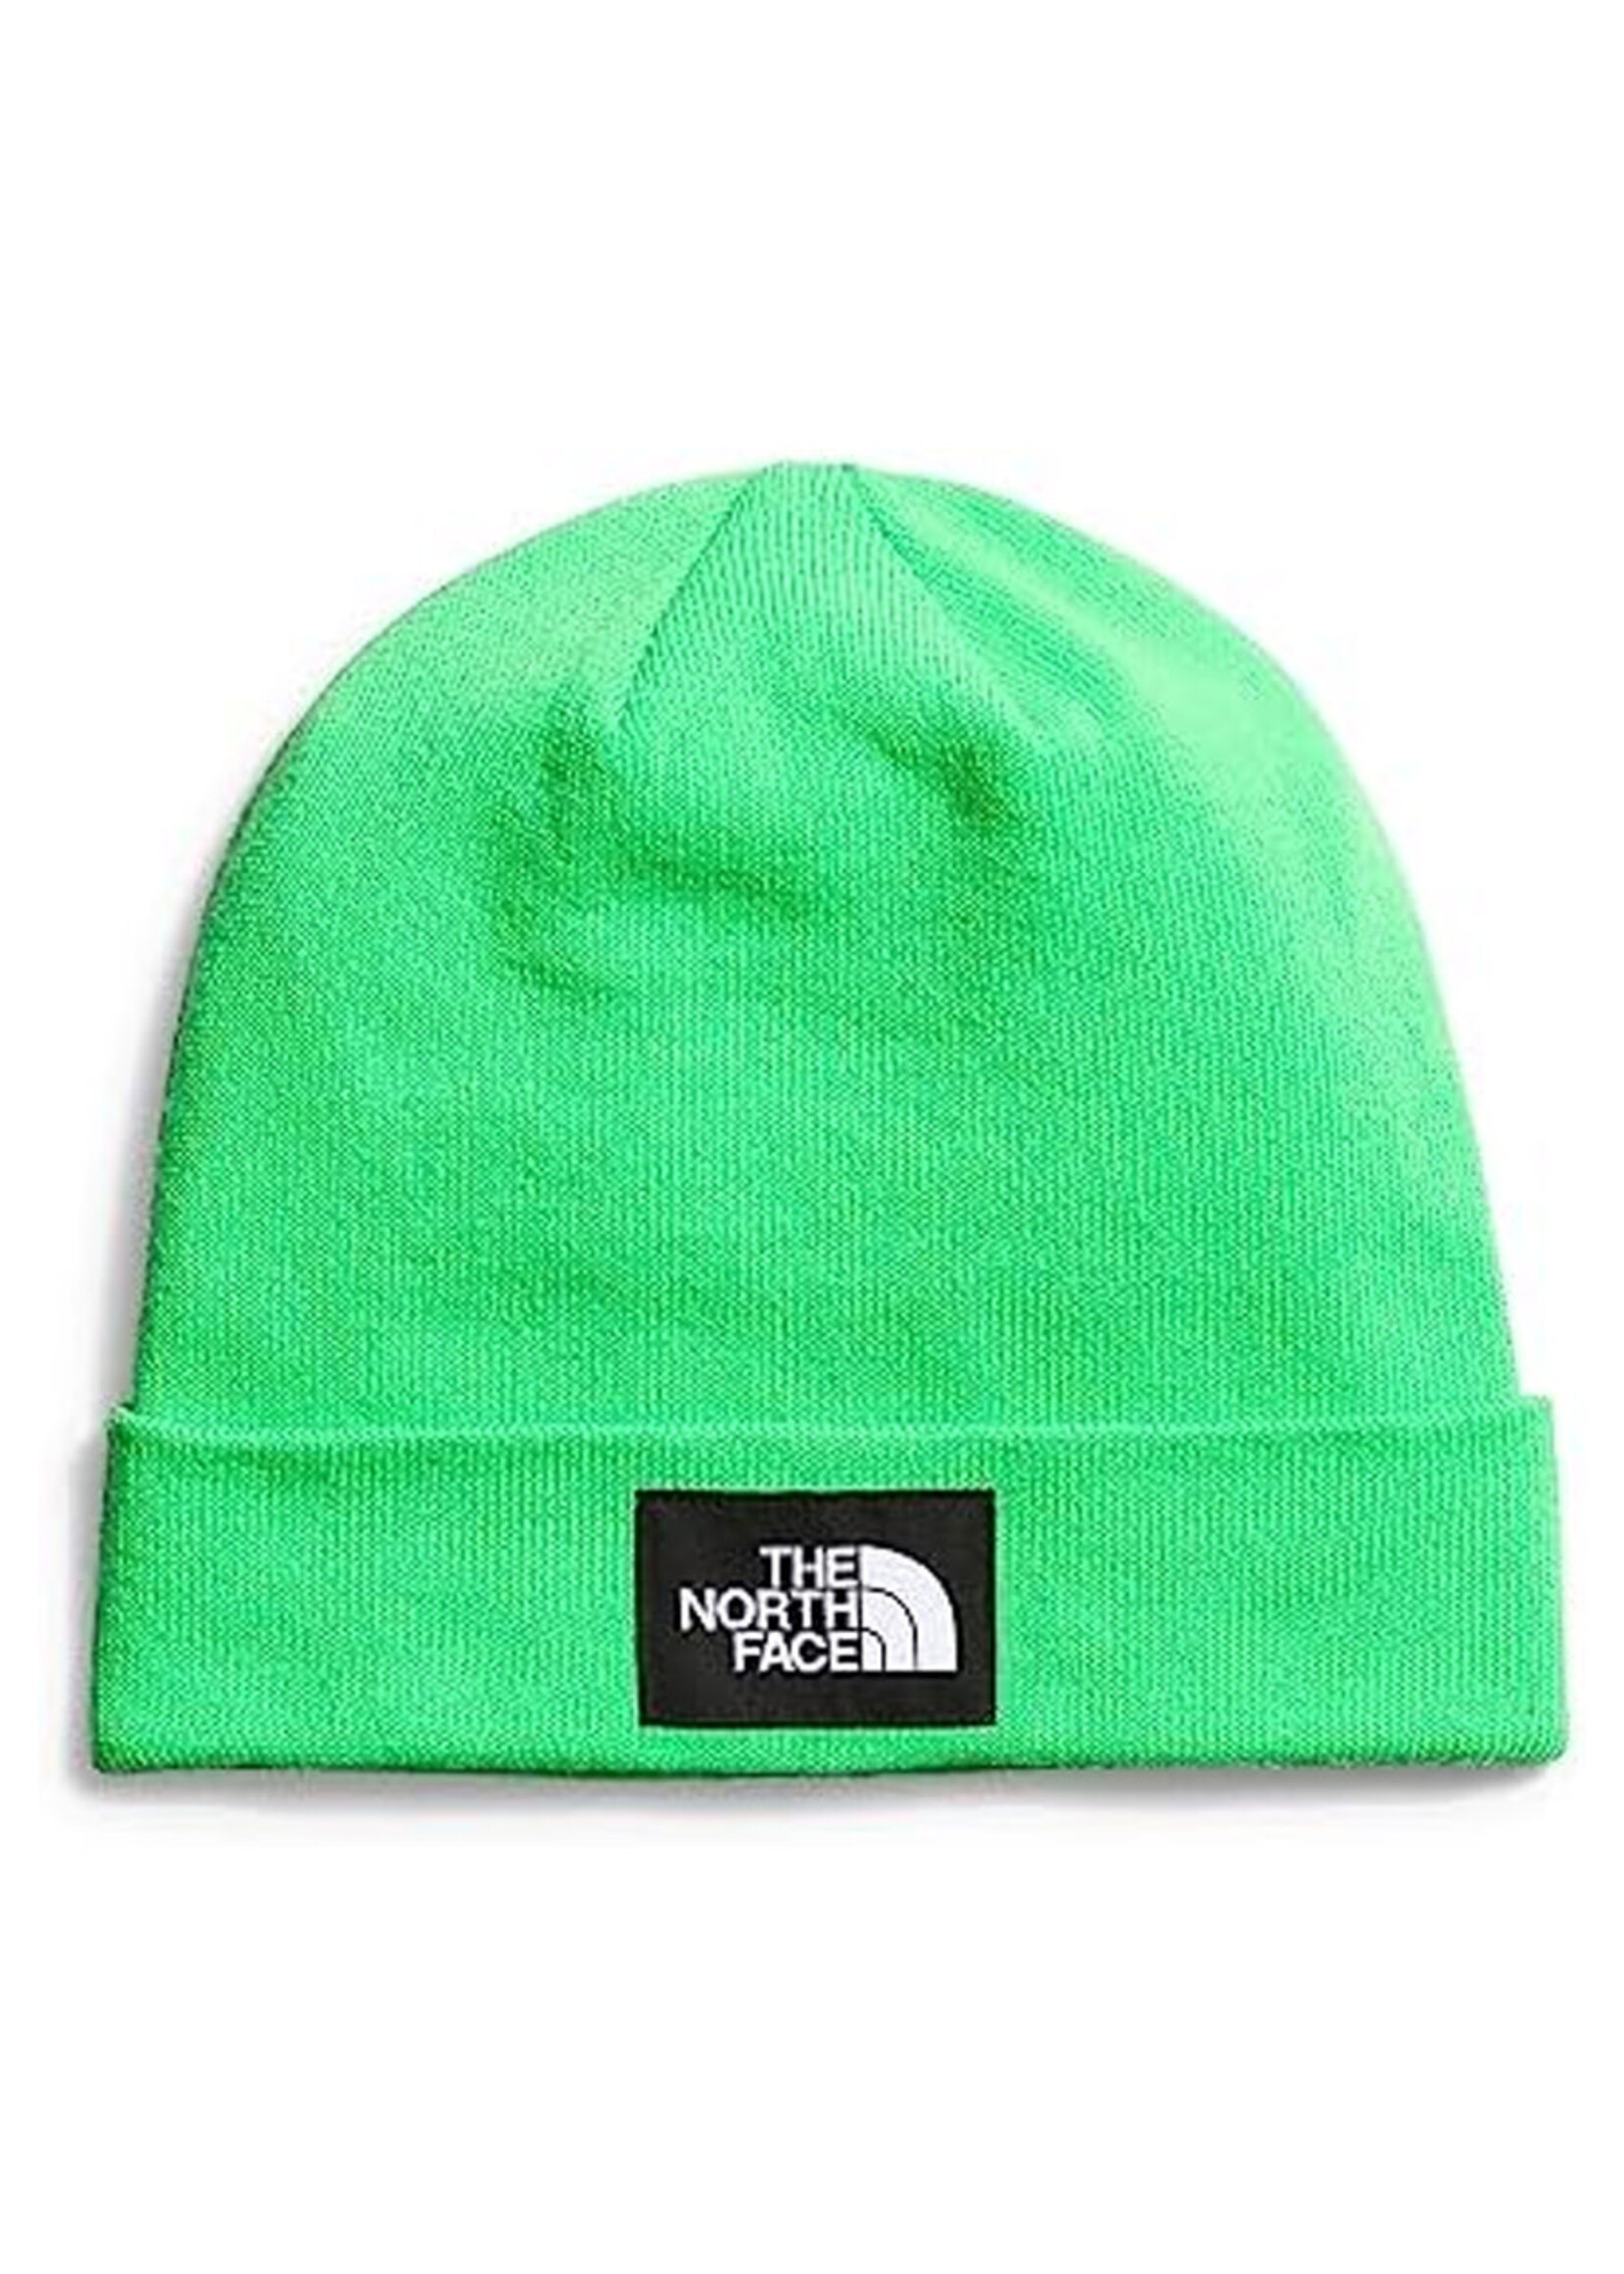 THE NORTH FACE Tuque DOCK WORKER